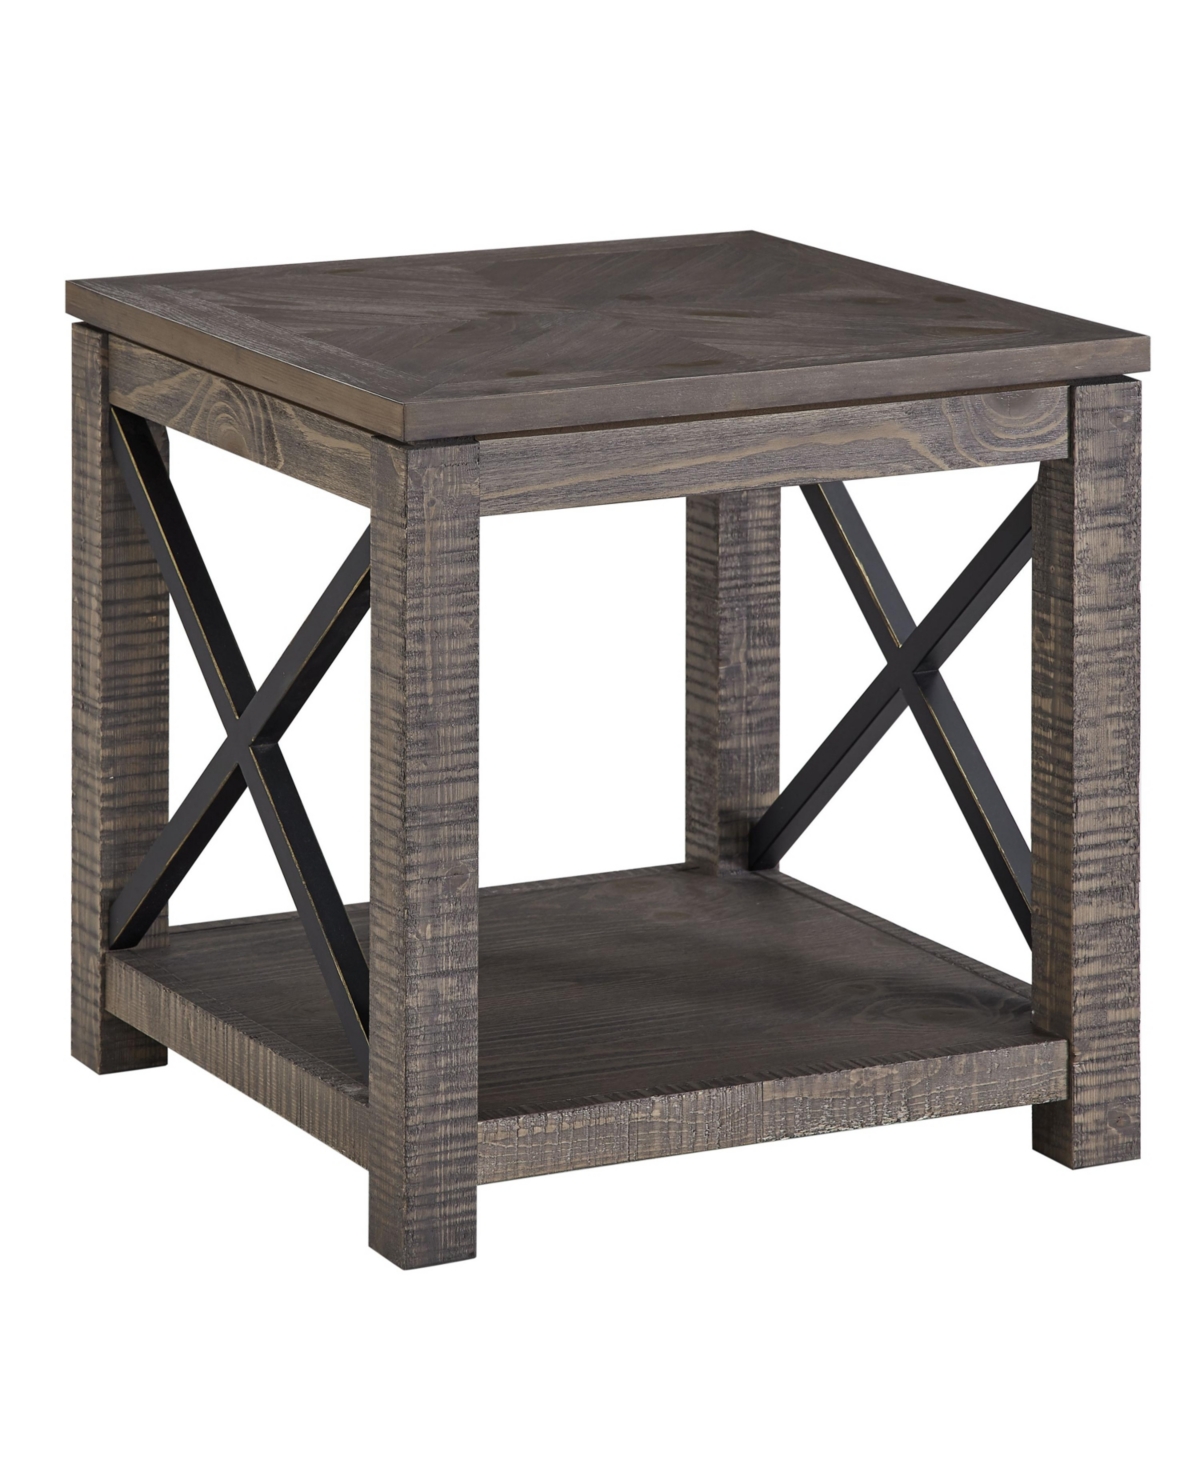 Steve Silver Dexter 24" Square Wooden End Table In Driftwood With Ruff-hewn Distressing